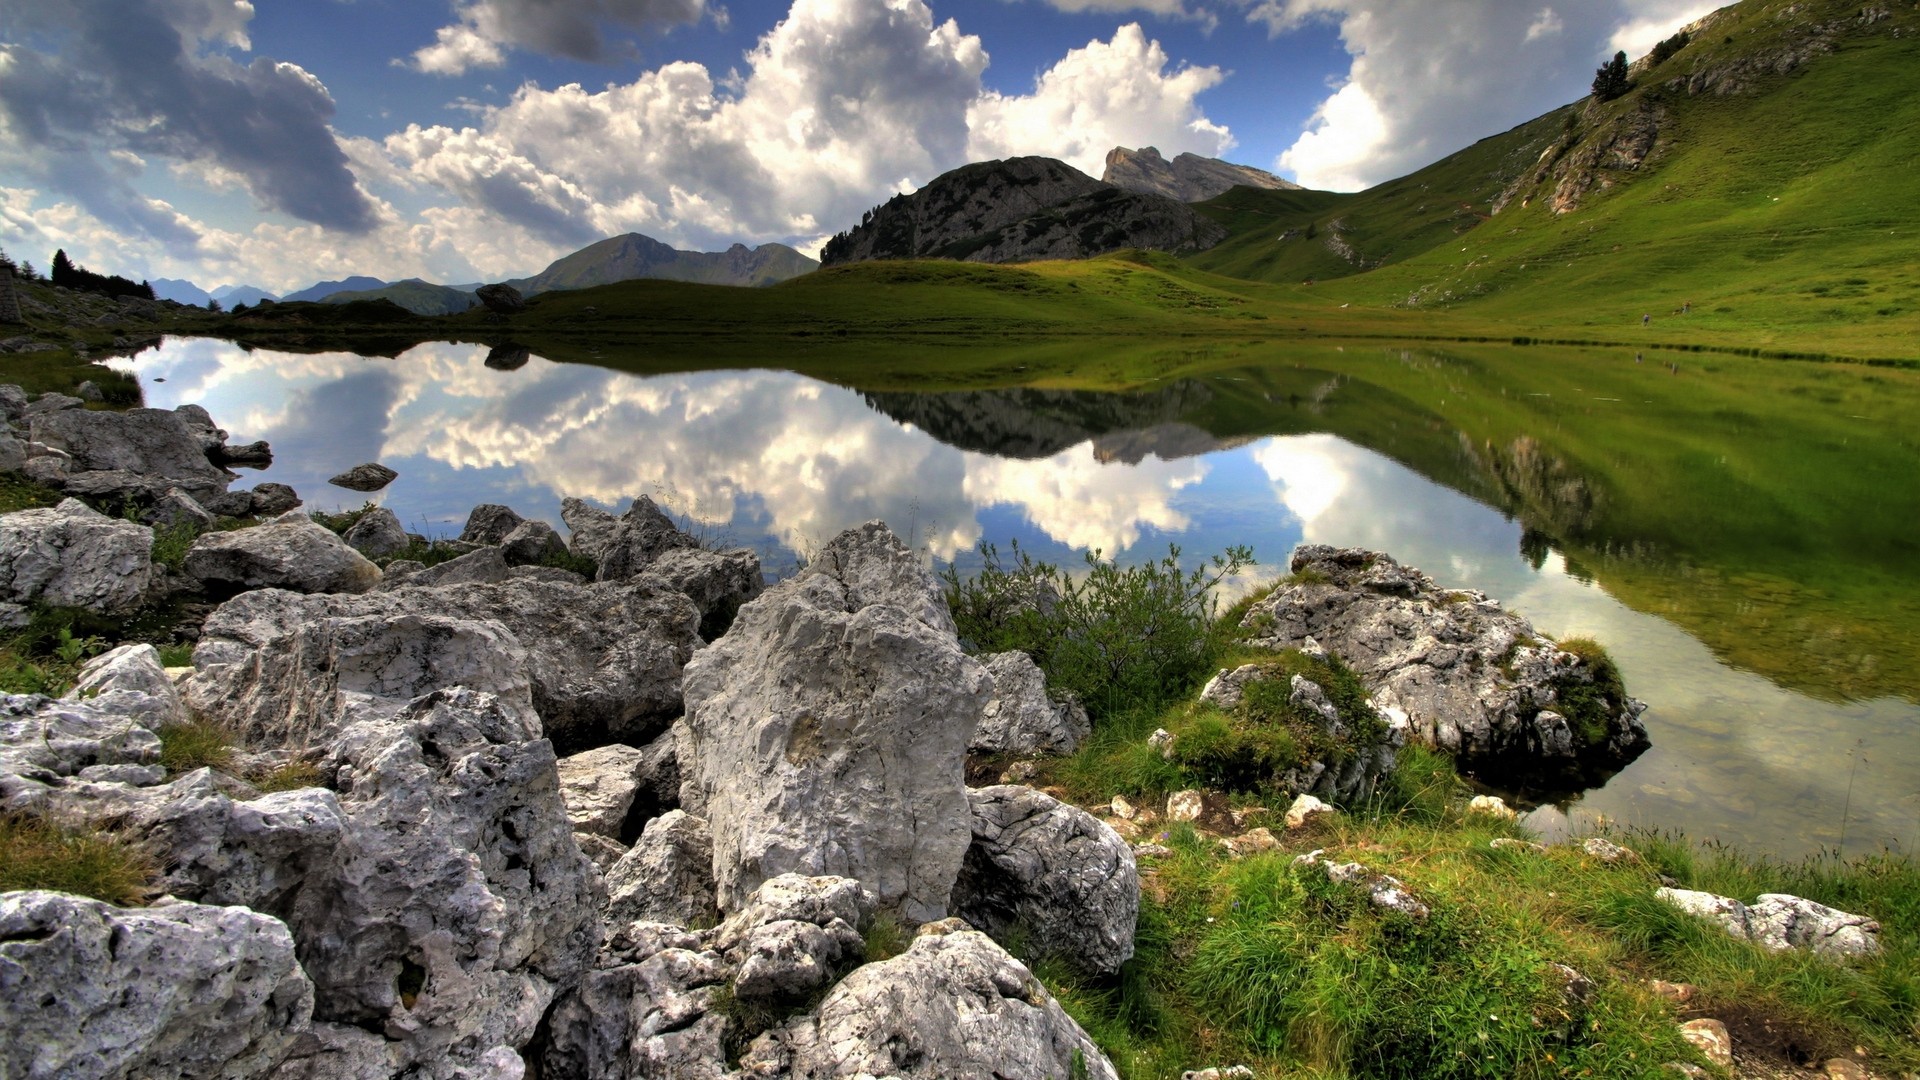 General 1920x1080 nature landscape lake reflection sky clouds mountains rocks